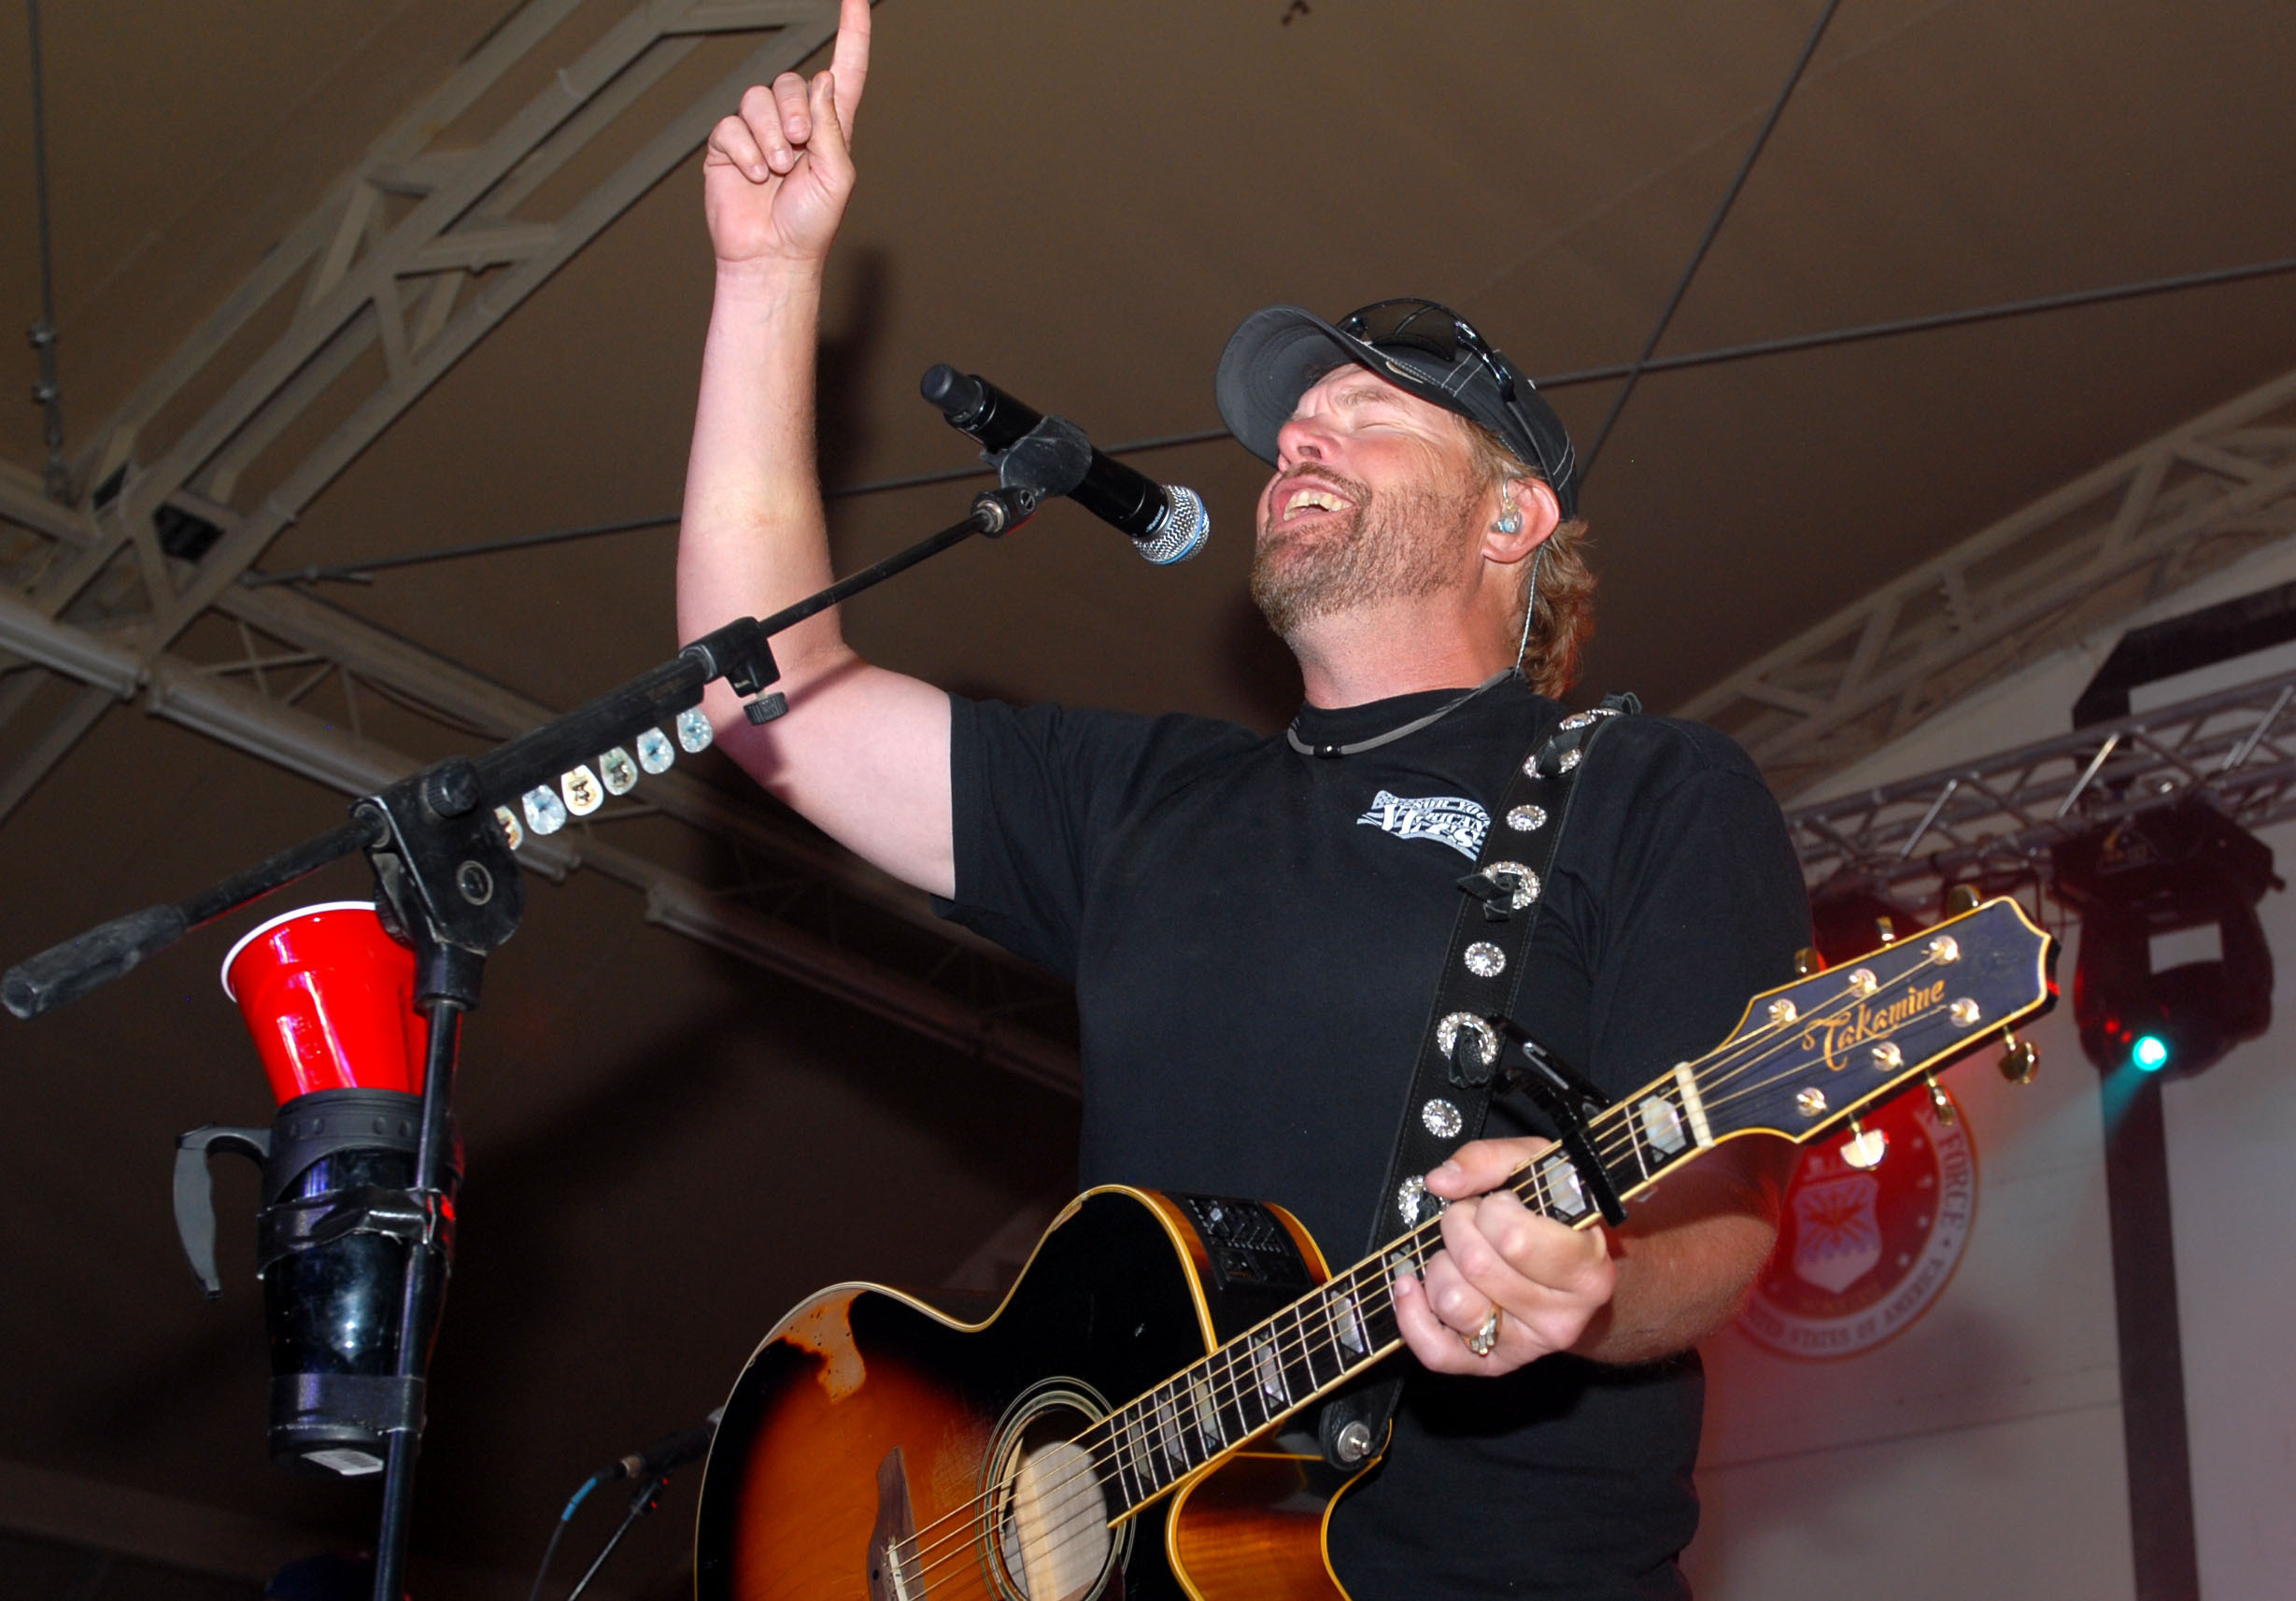 Toby Keith, who has been battling cancer, tells fans he has the